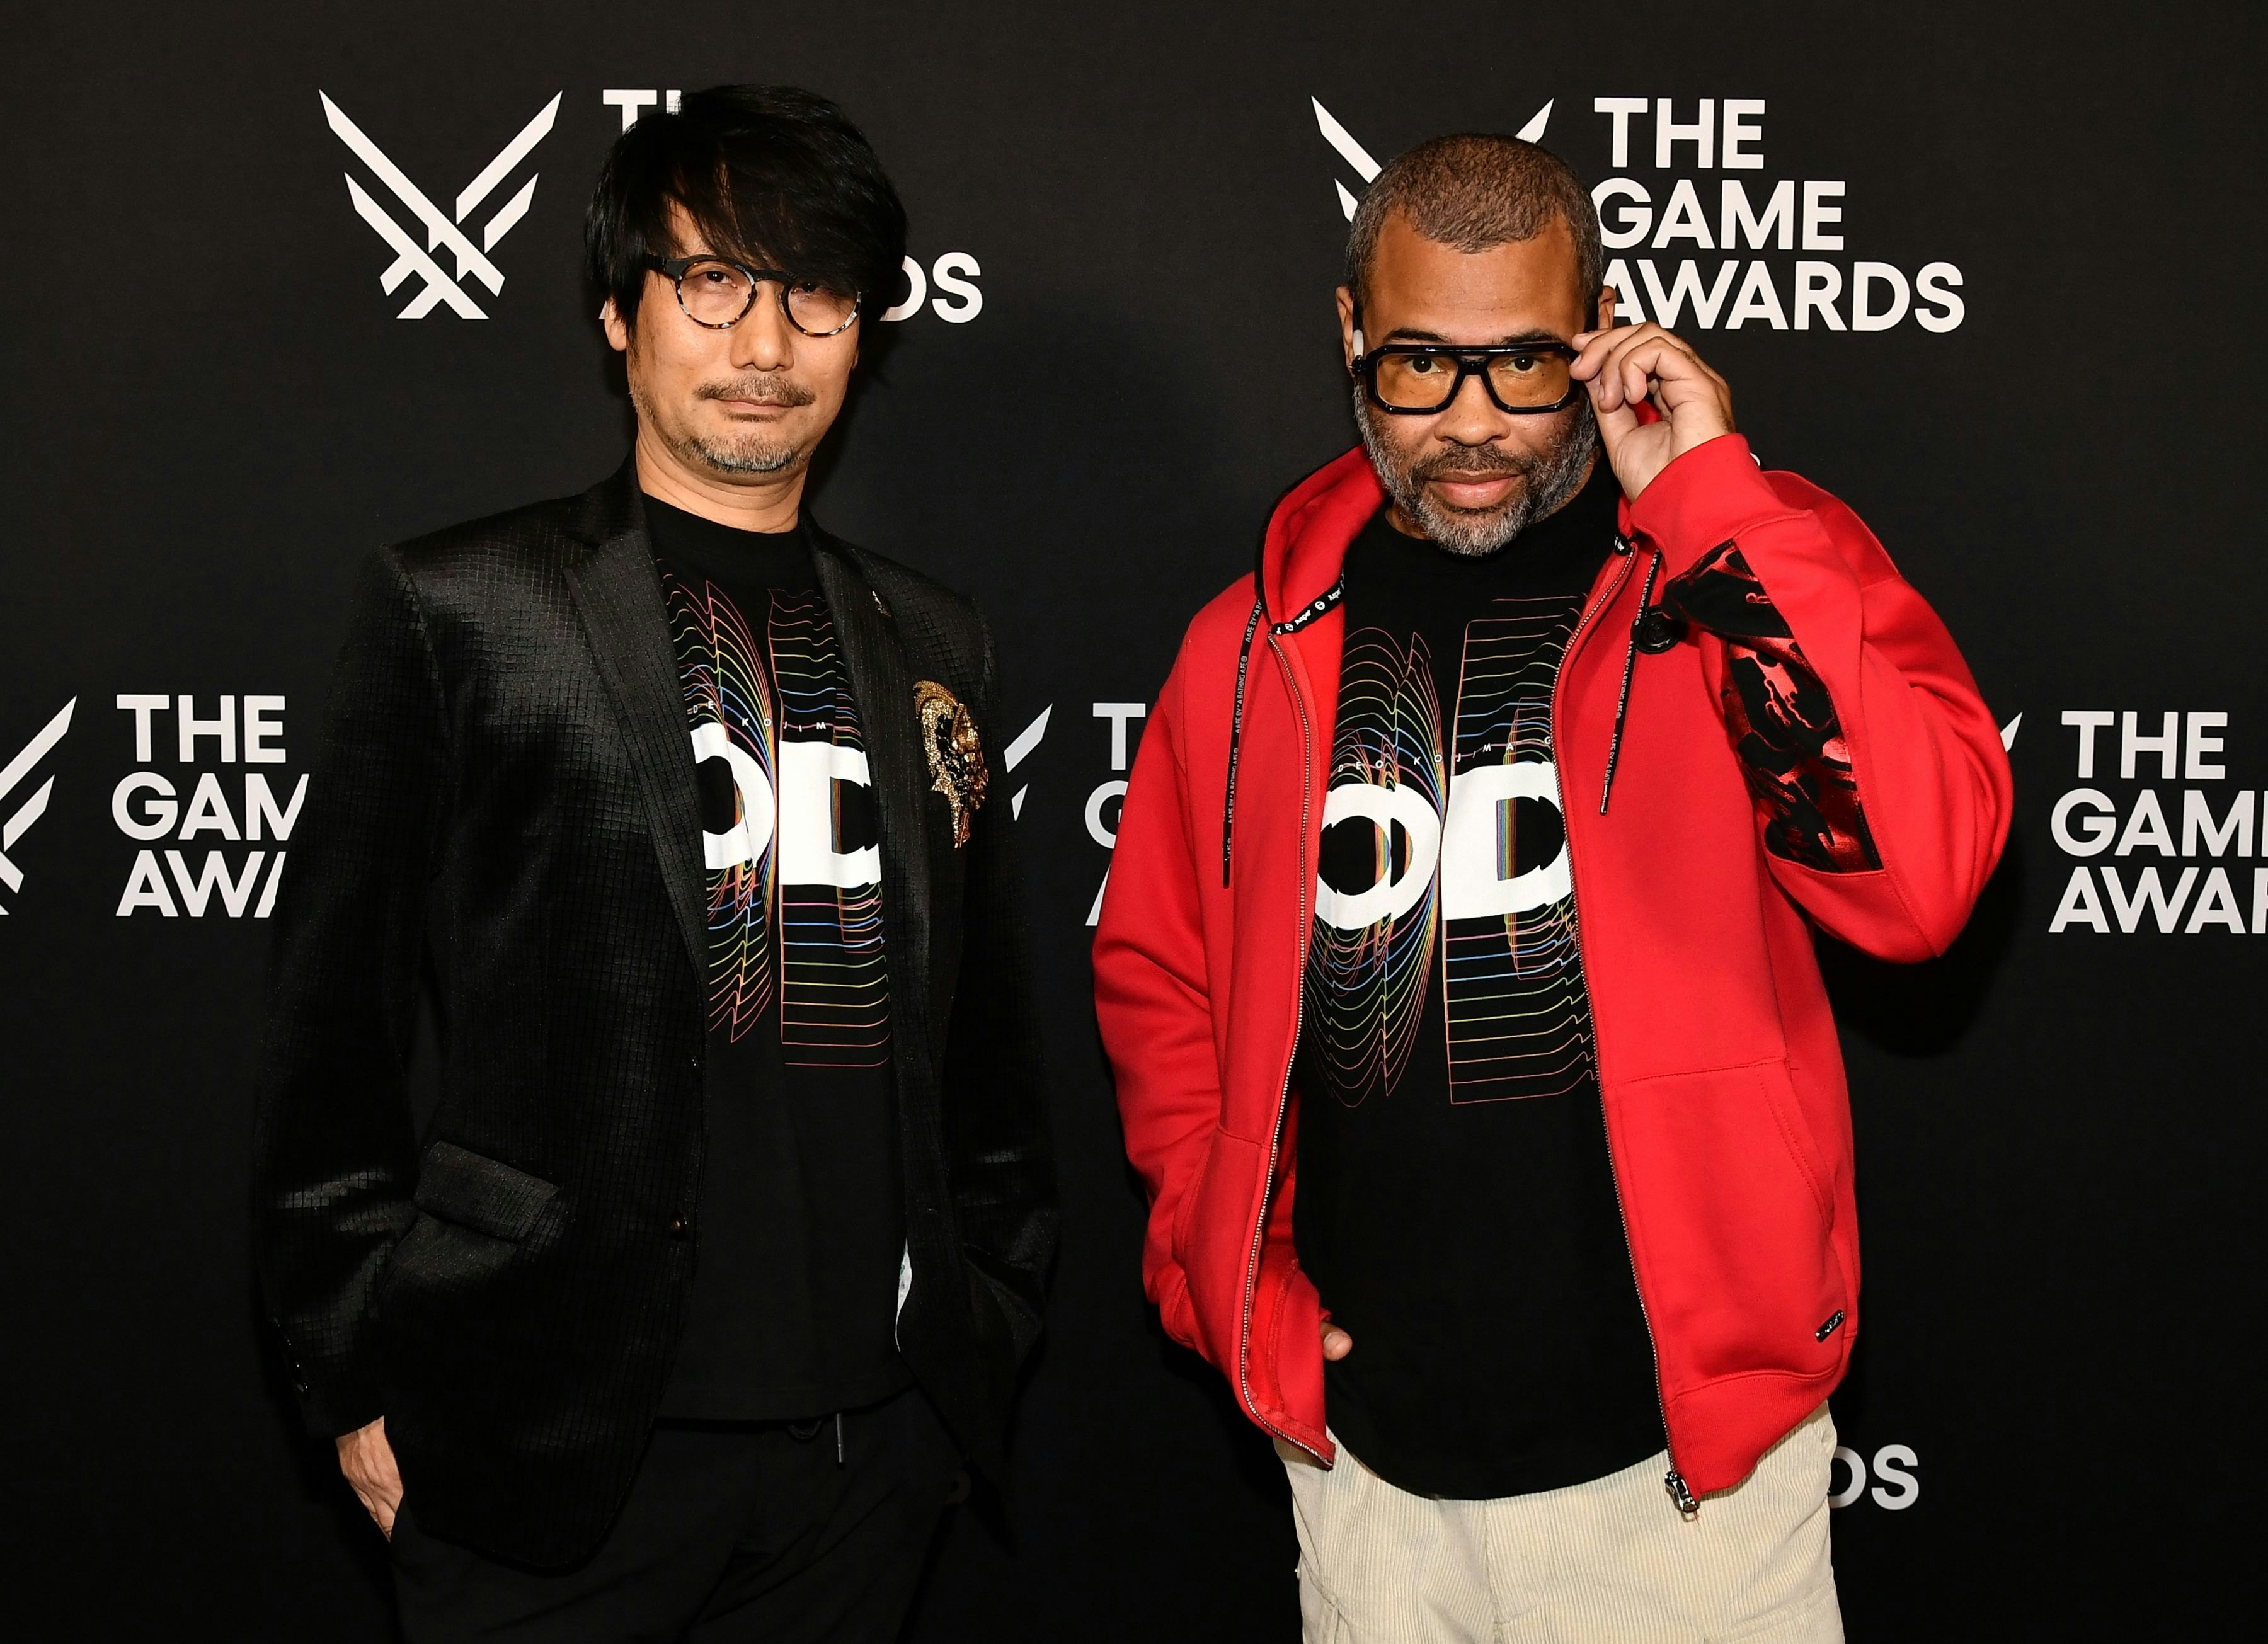 The Game Awards updates: Kojima announces new project with Jordan Peele,  Baldur's Gate 3 wins Game of the Year — as it happened - ABC News